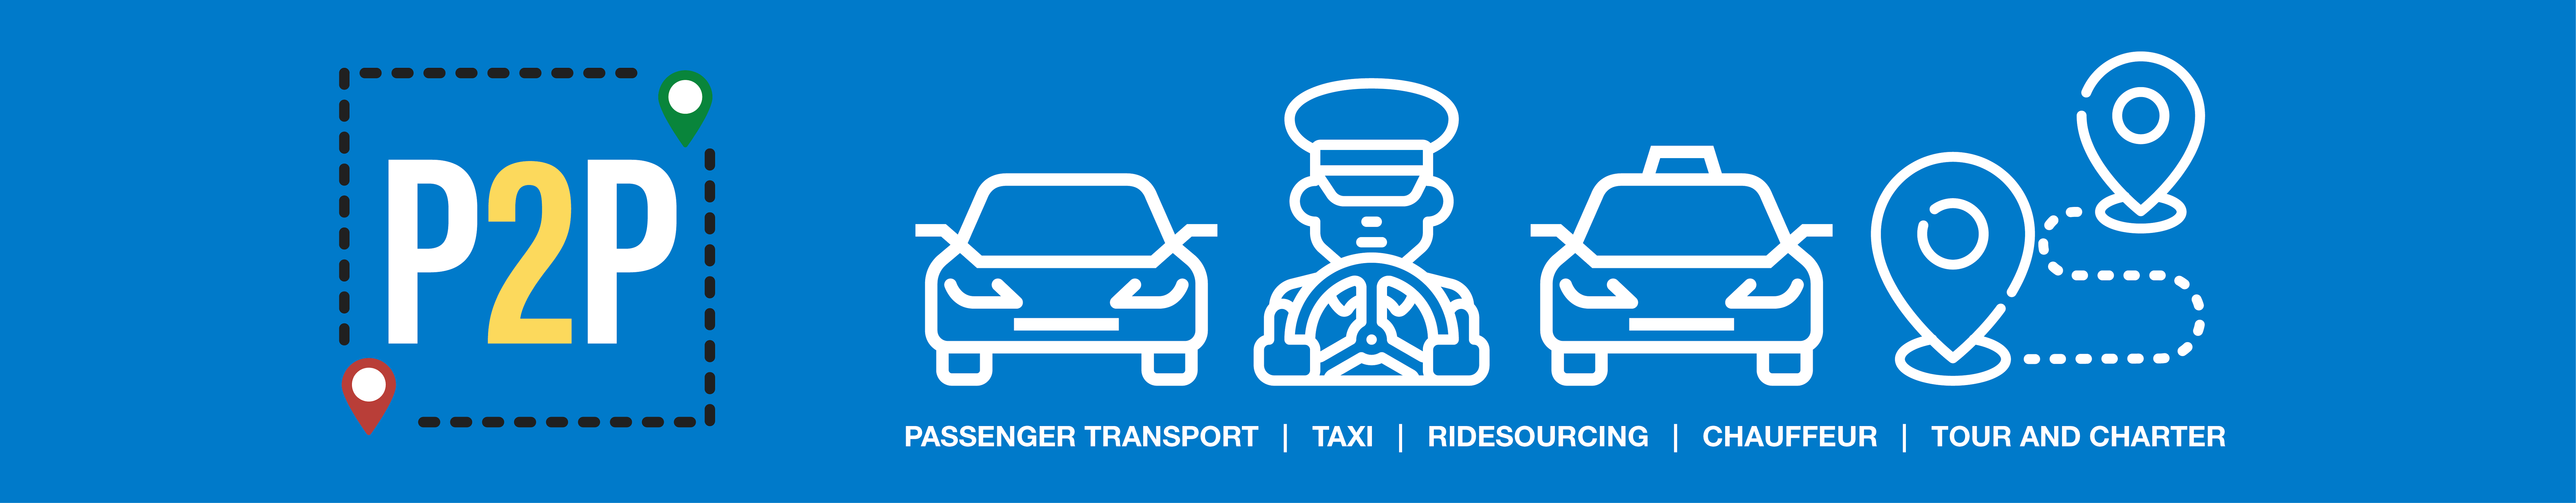 P2P logo with various forms of point to point transport (passenger transport, taxi, ridesourcing, chauffeur, tour, charter)